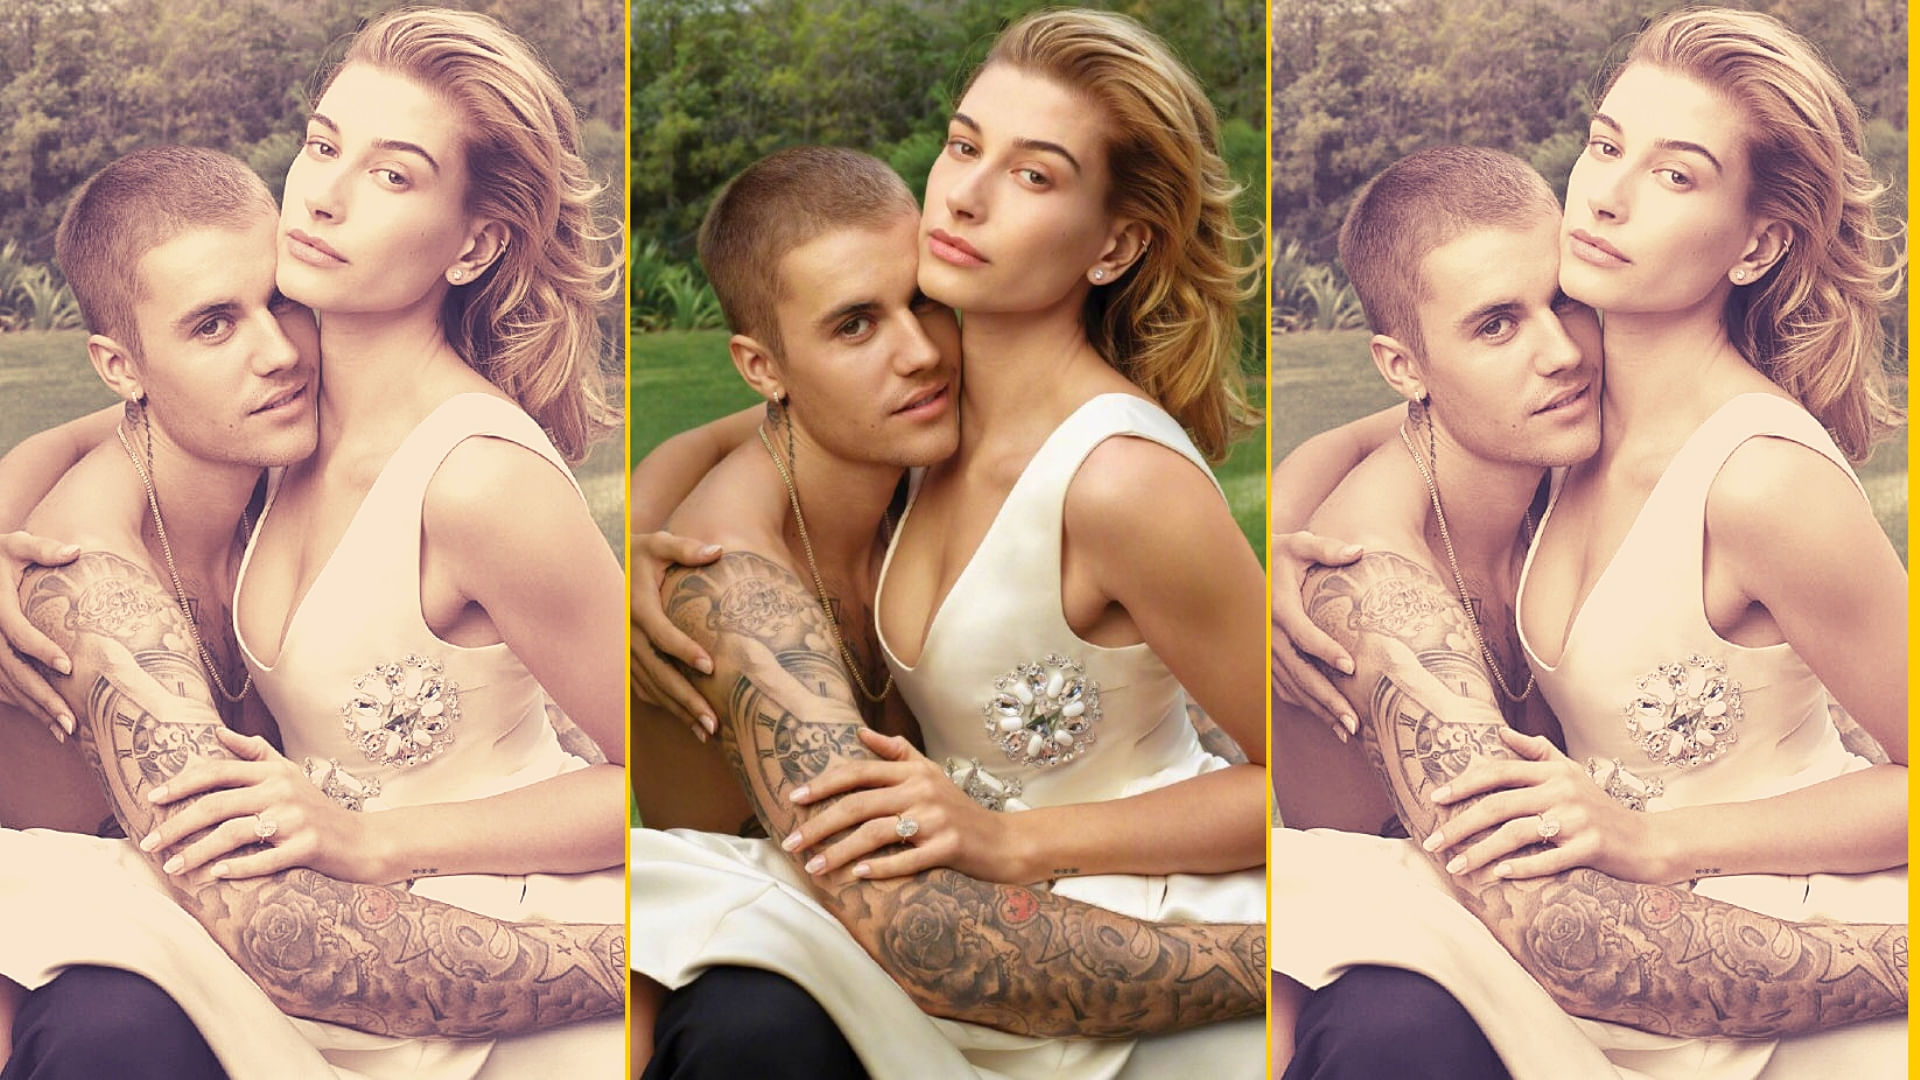 Justin Bieber and Hailey Baldwin appear together in the February issue of <i>Vogue</i>.